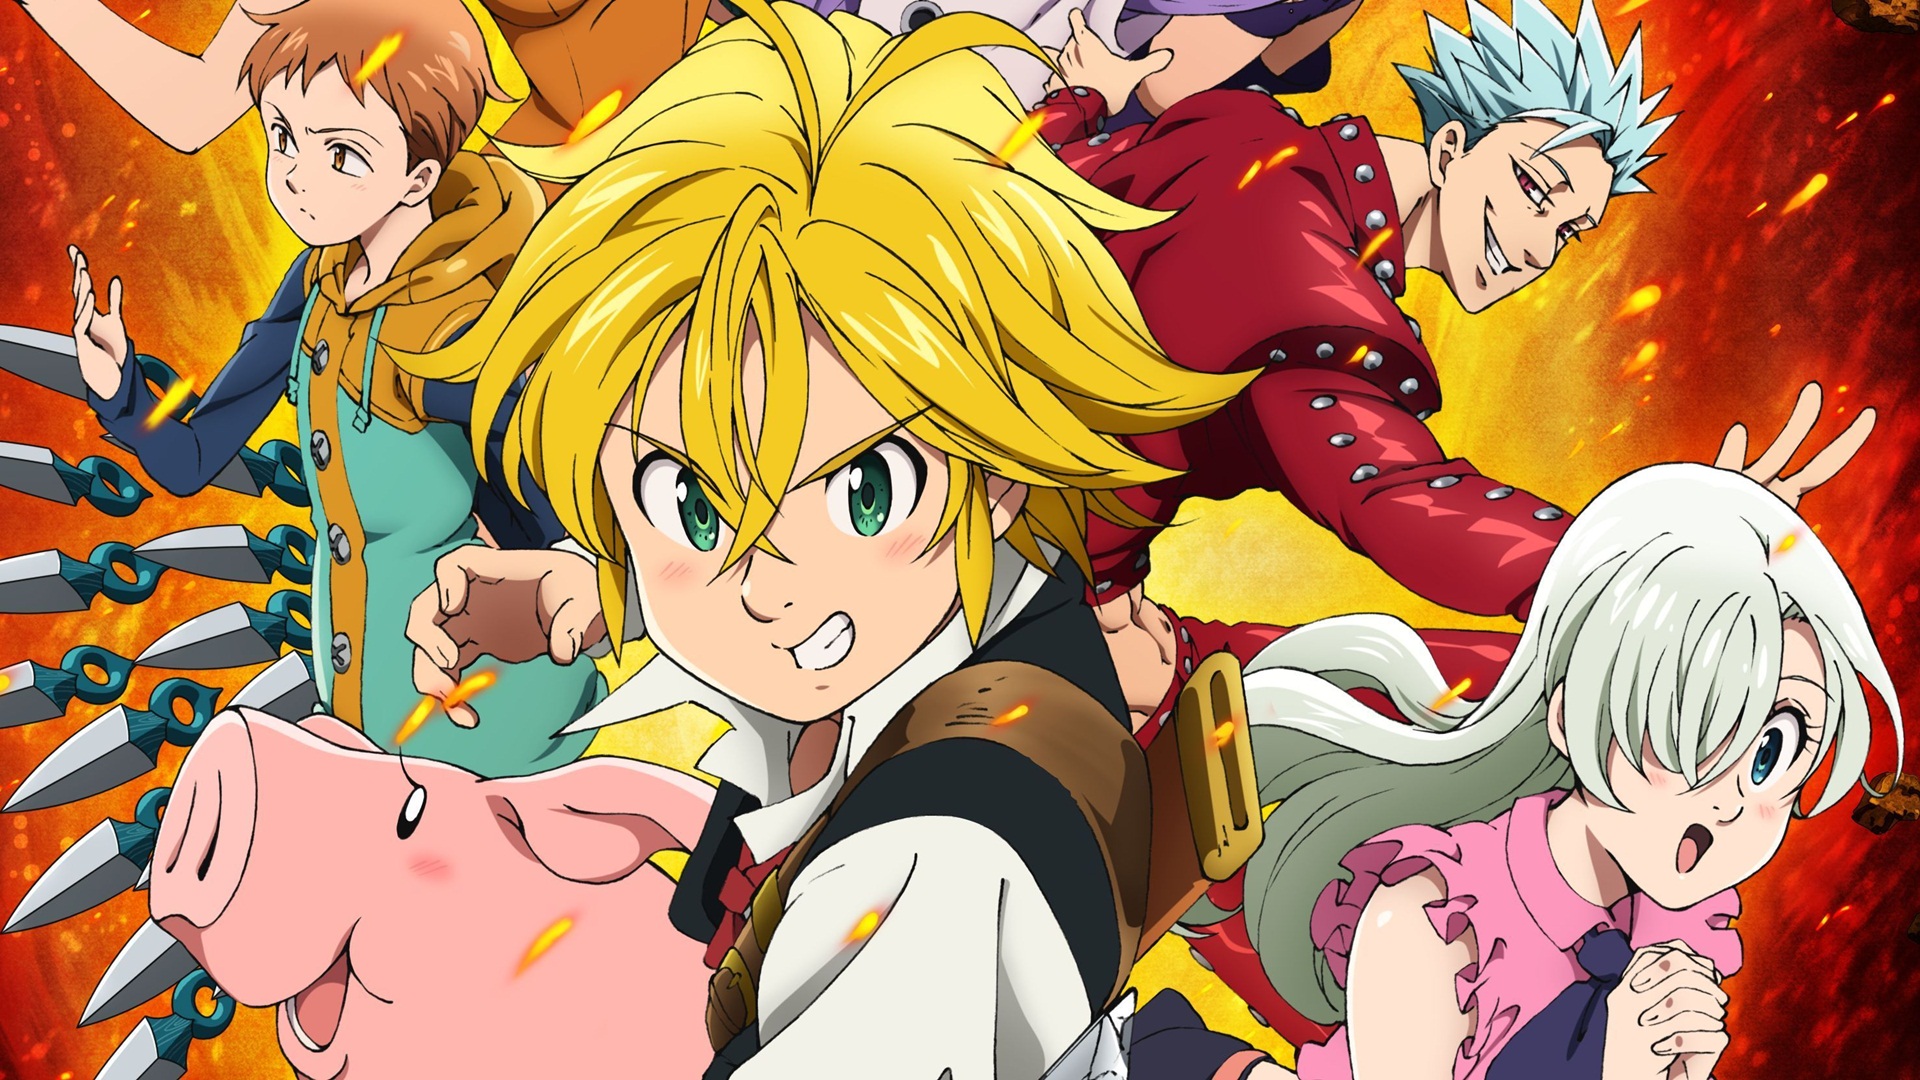 The Seven Deadly Sins HD Background Wallpaper 40999